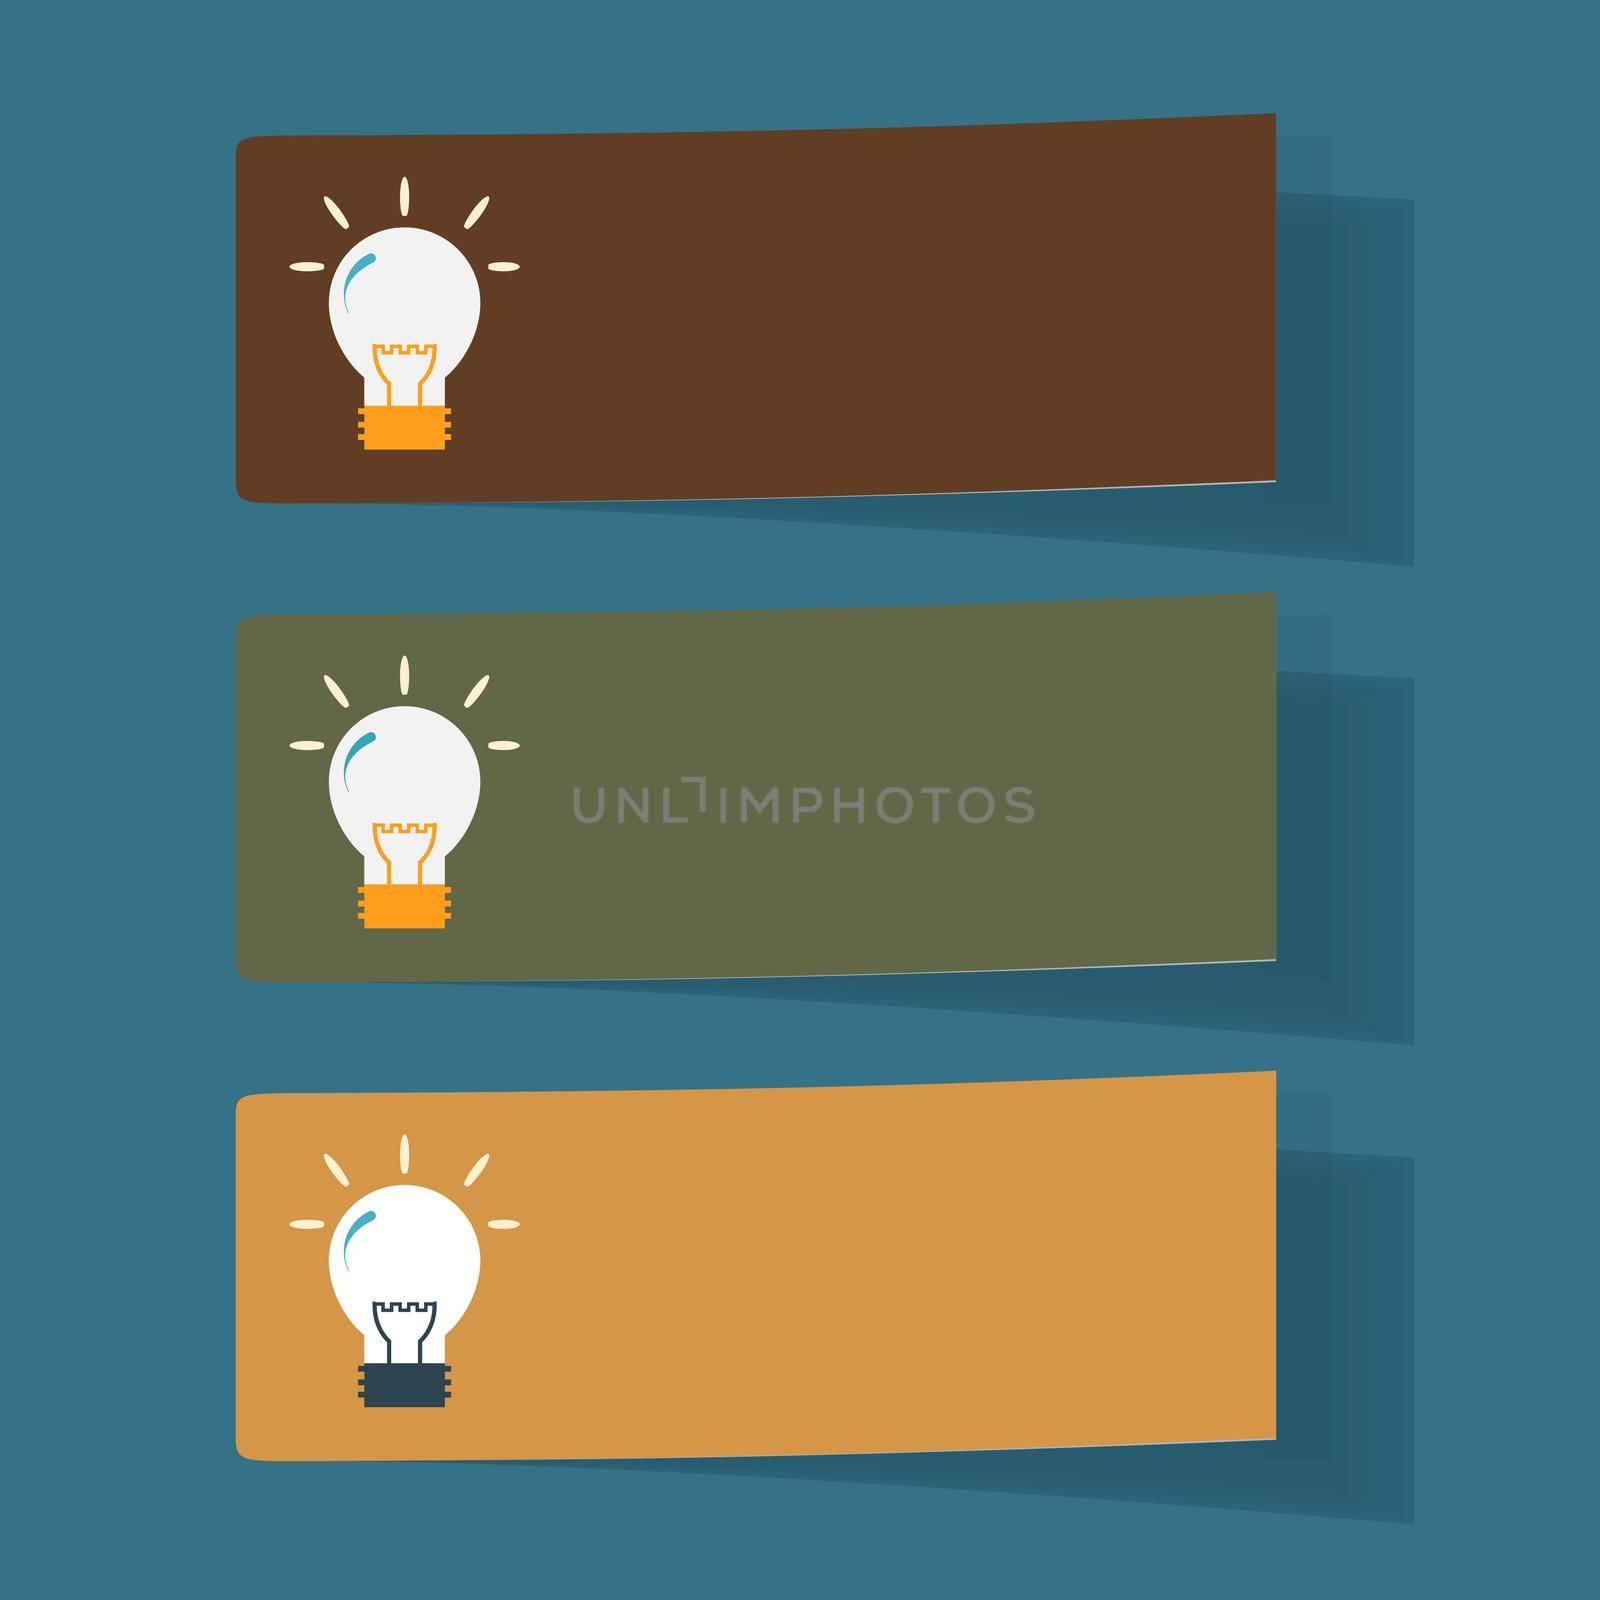 Set of simple icons flat color light bulbs.